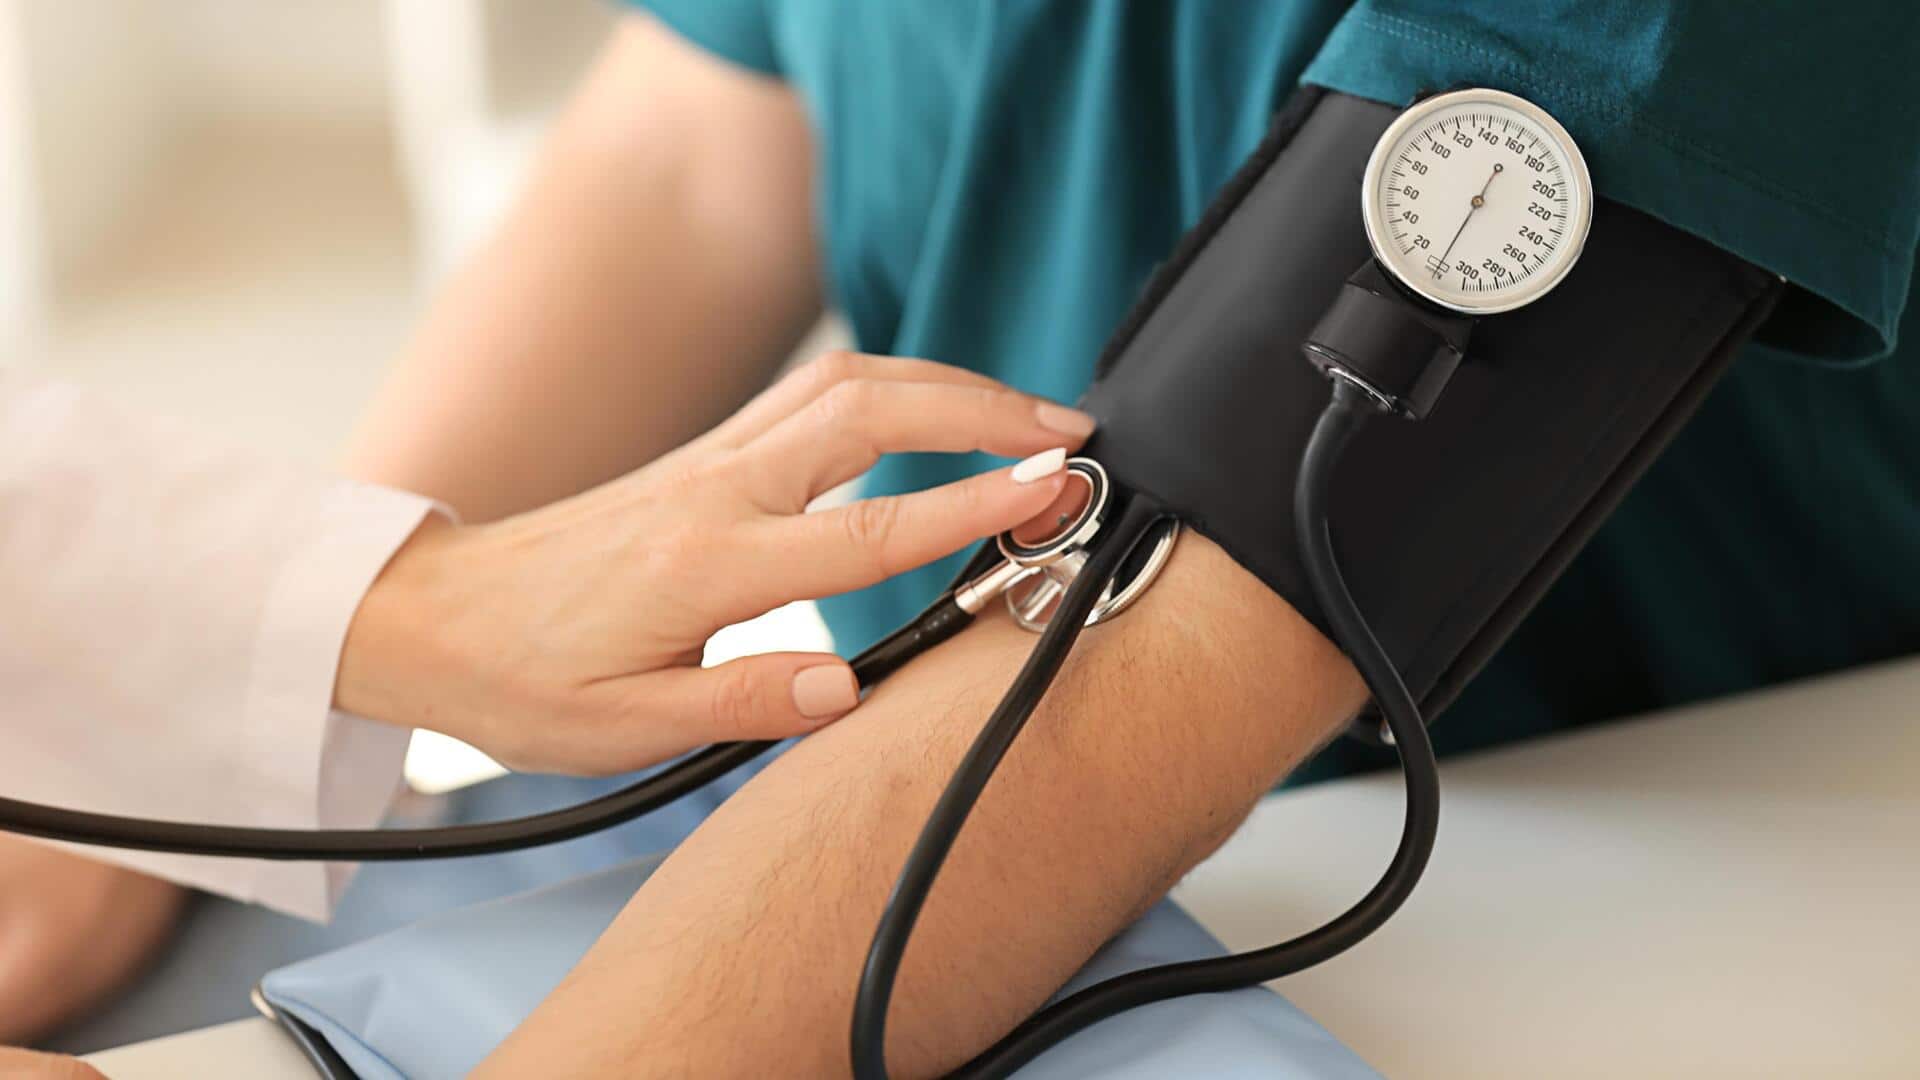 Here's how to measure your blood pressure correctly